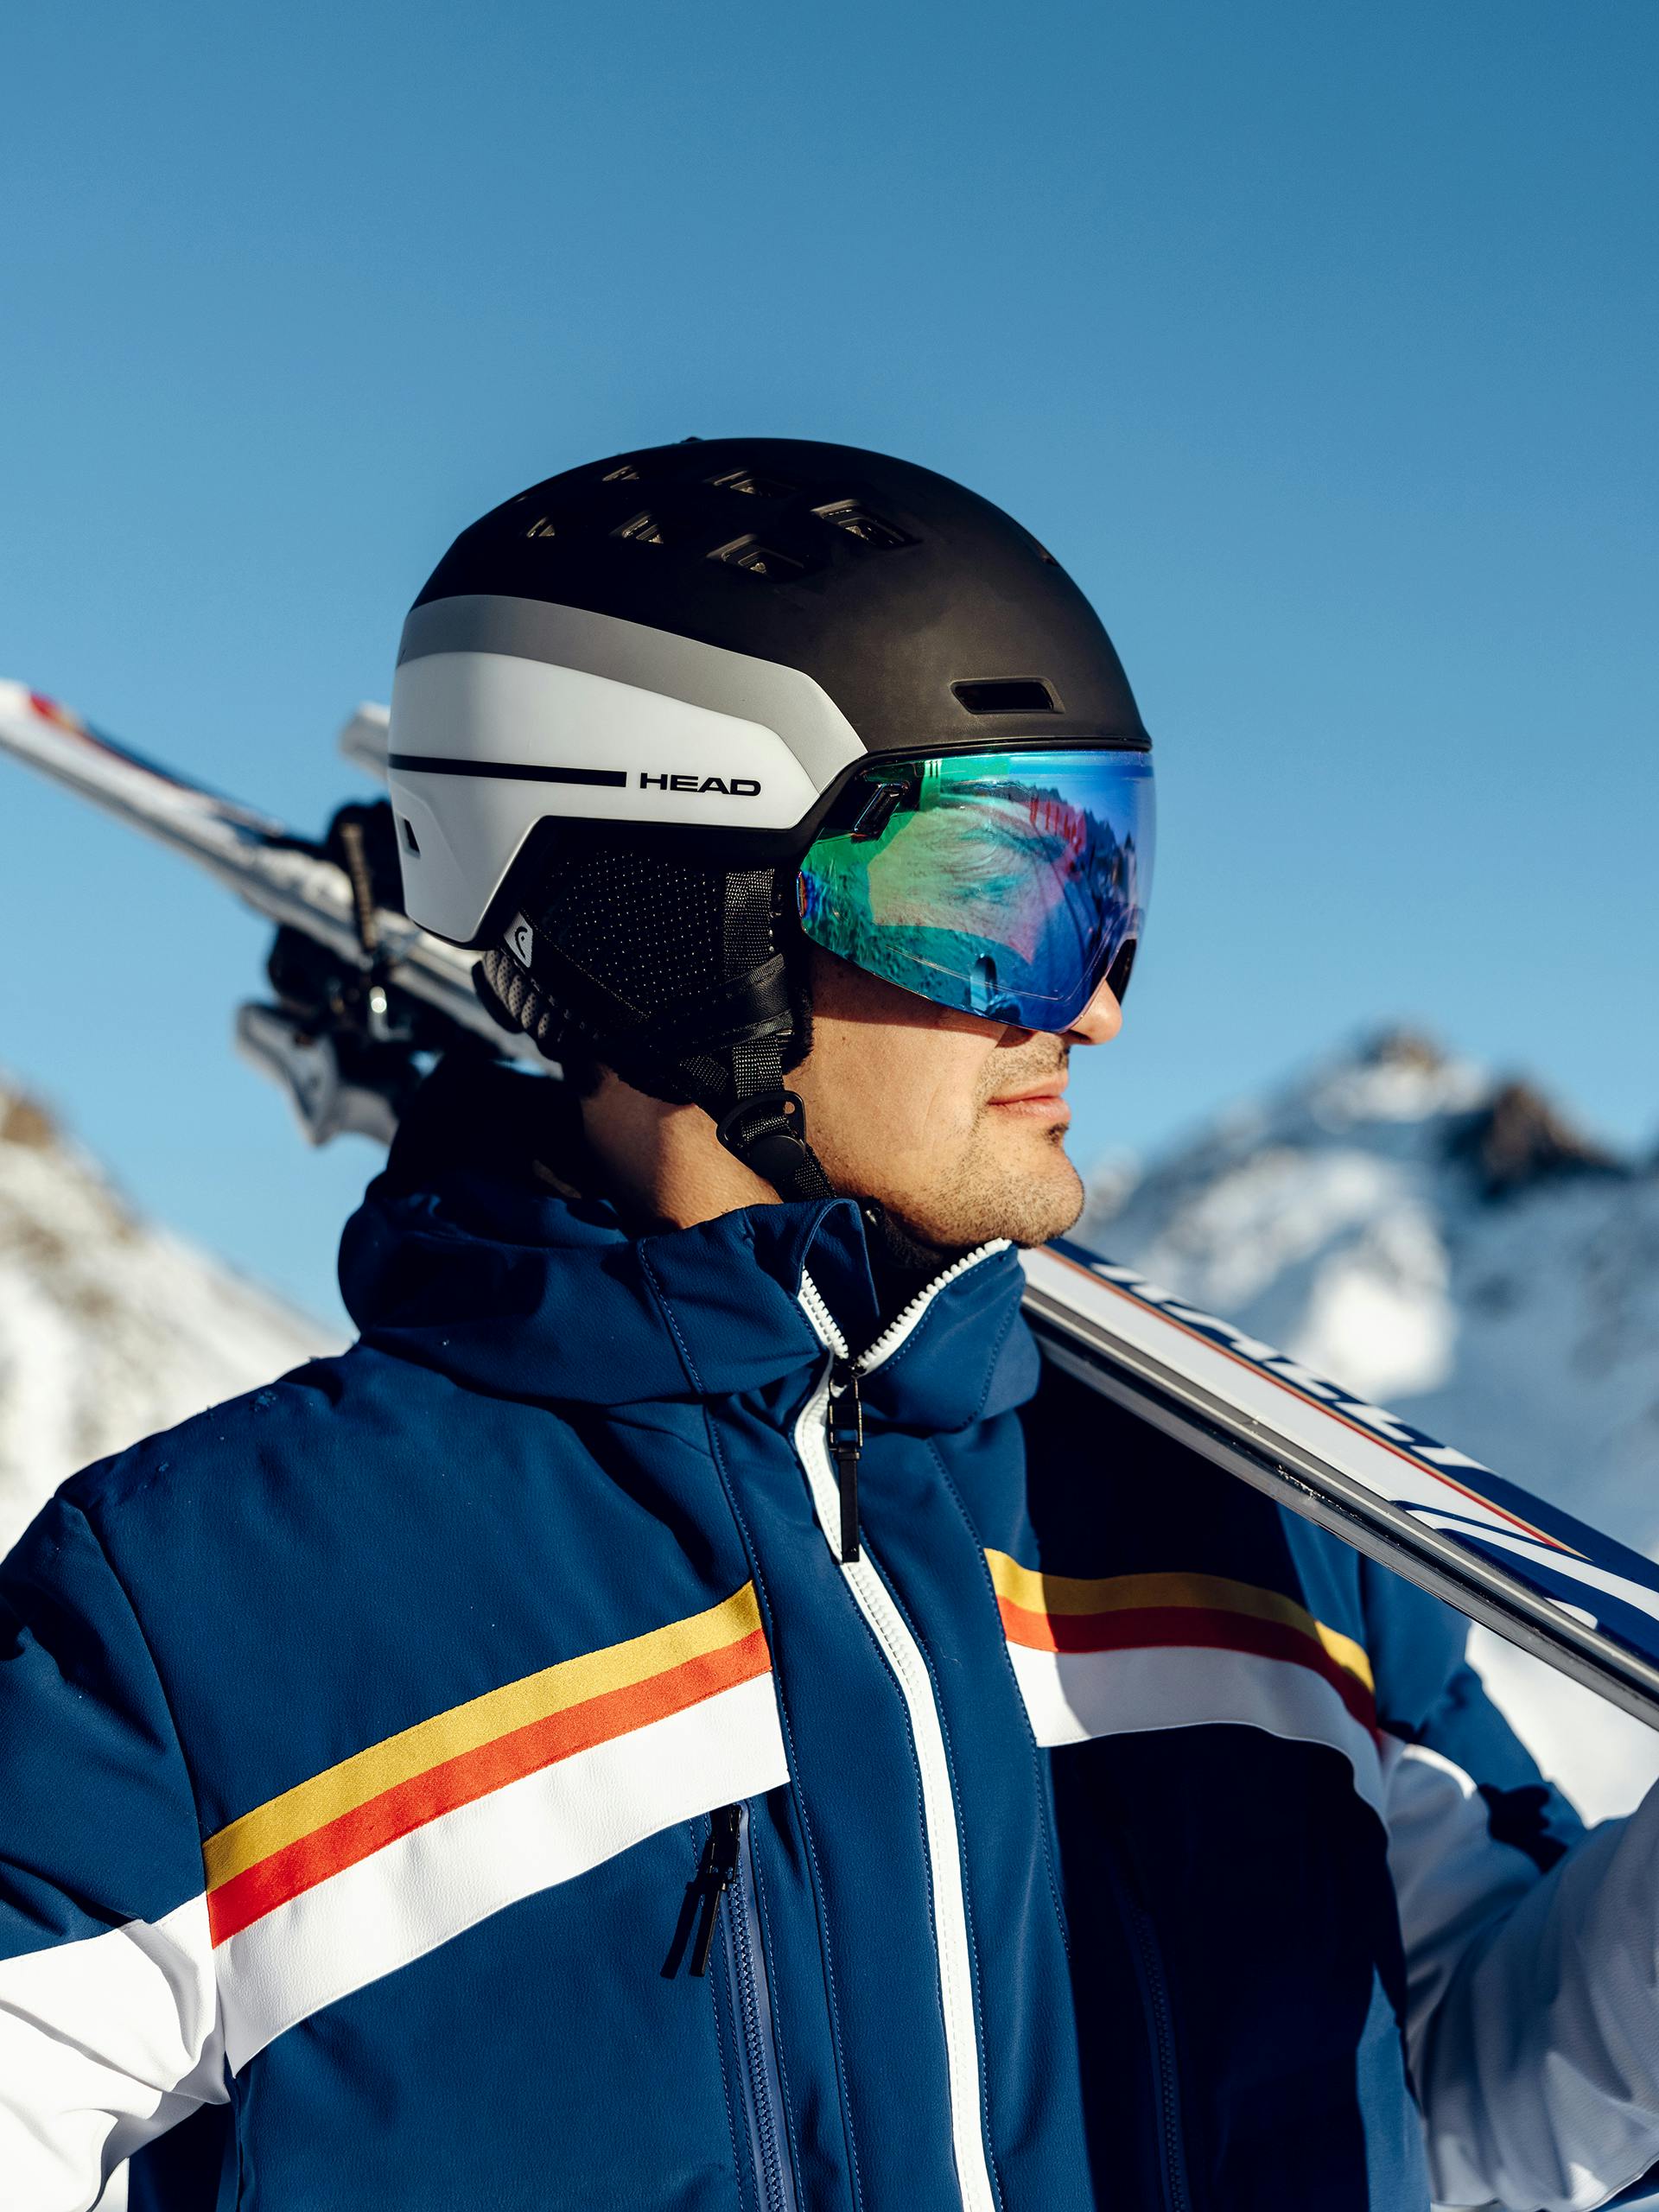 A man is pictured close up looking to the side, wearing the new Porsche Head ski helmet, Porsche ski jacket and holding Porsche skis on his shoulder.